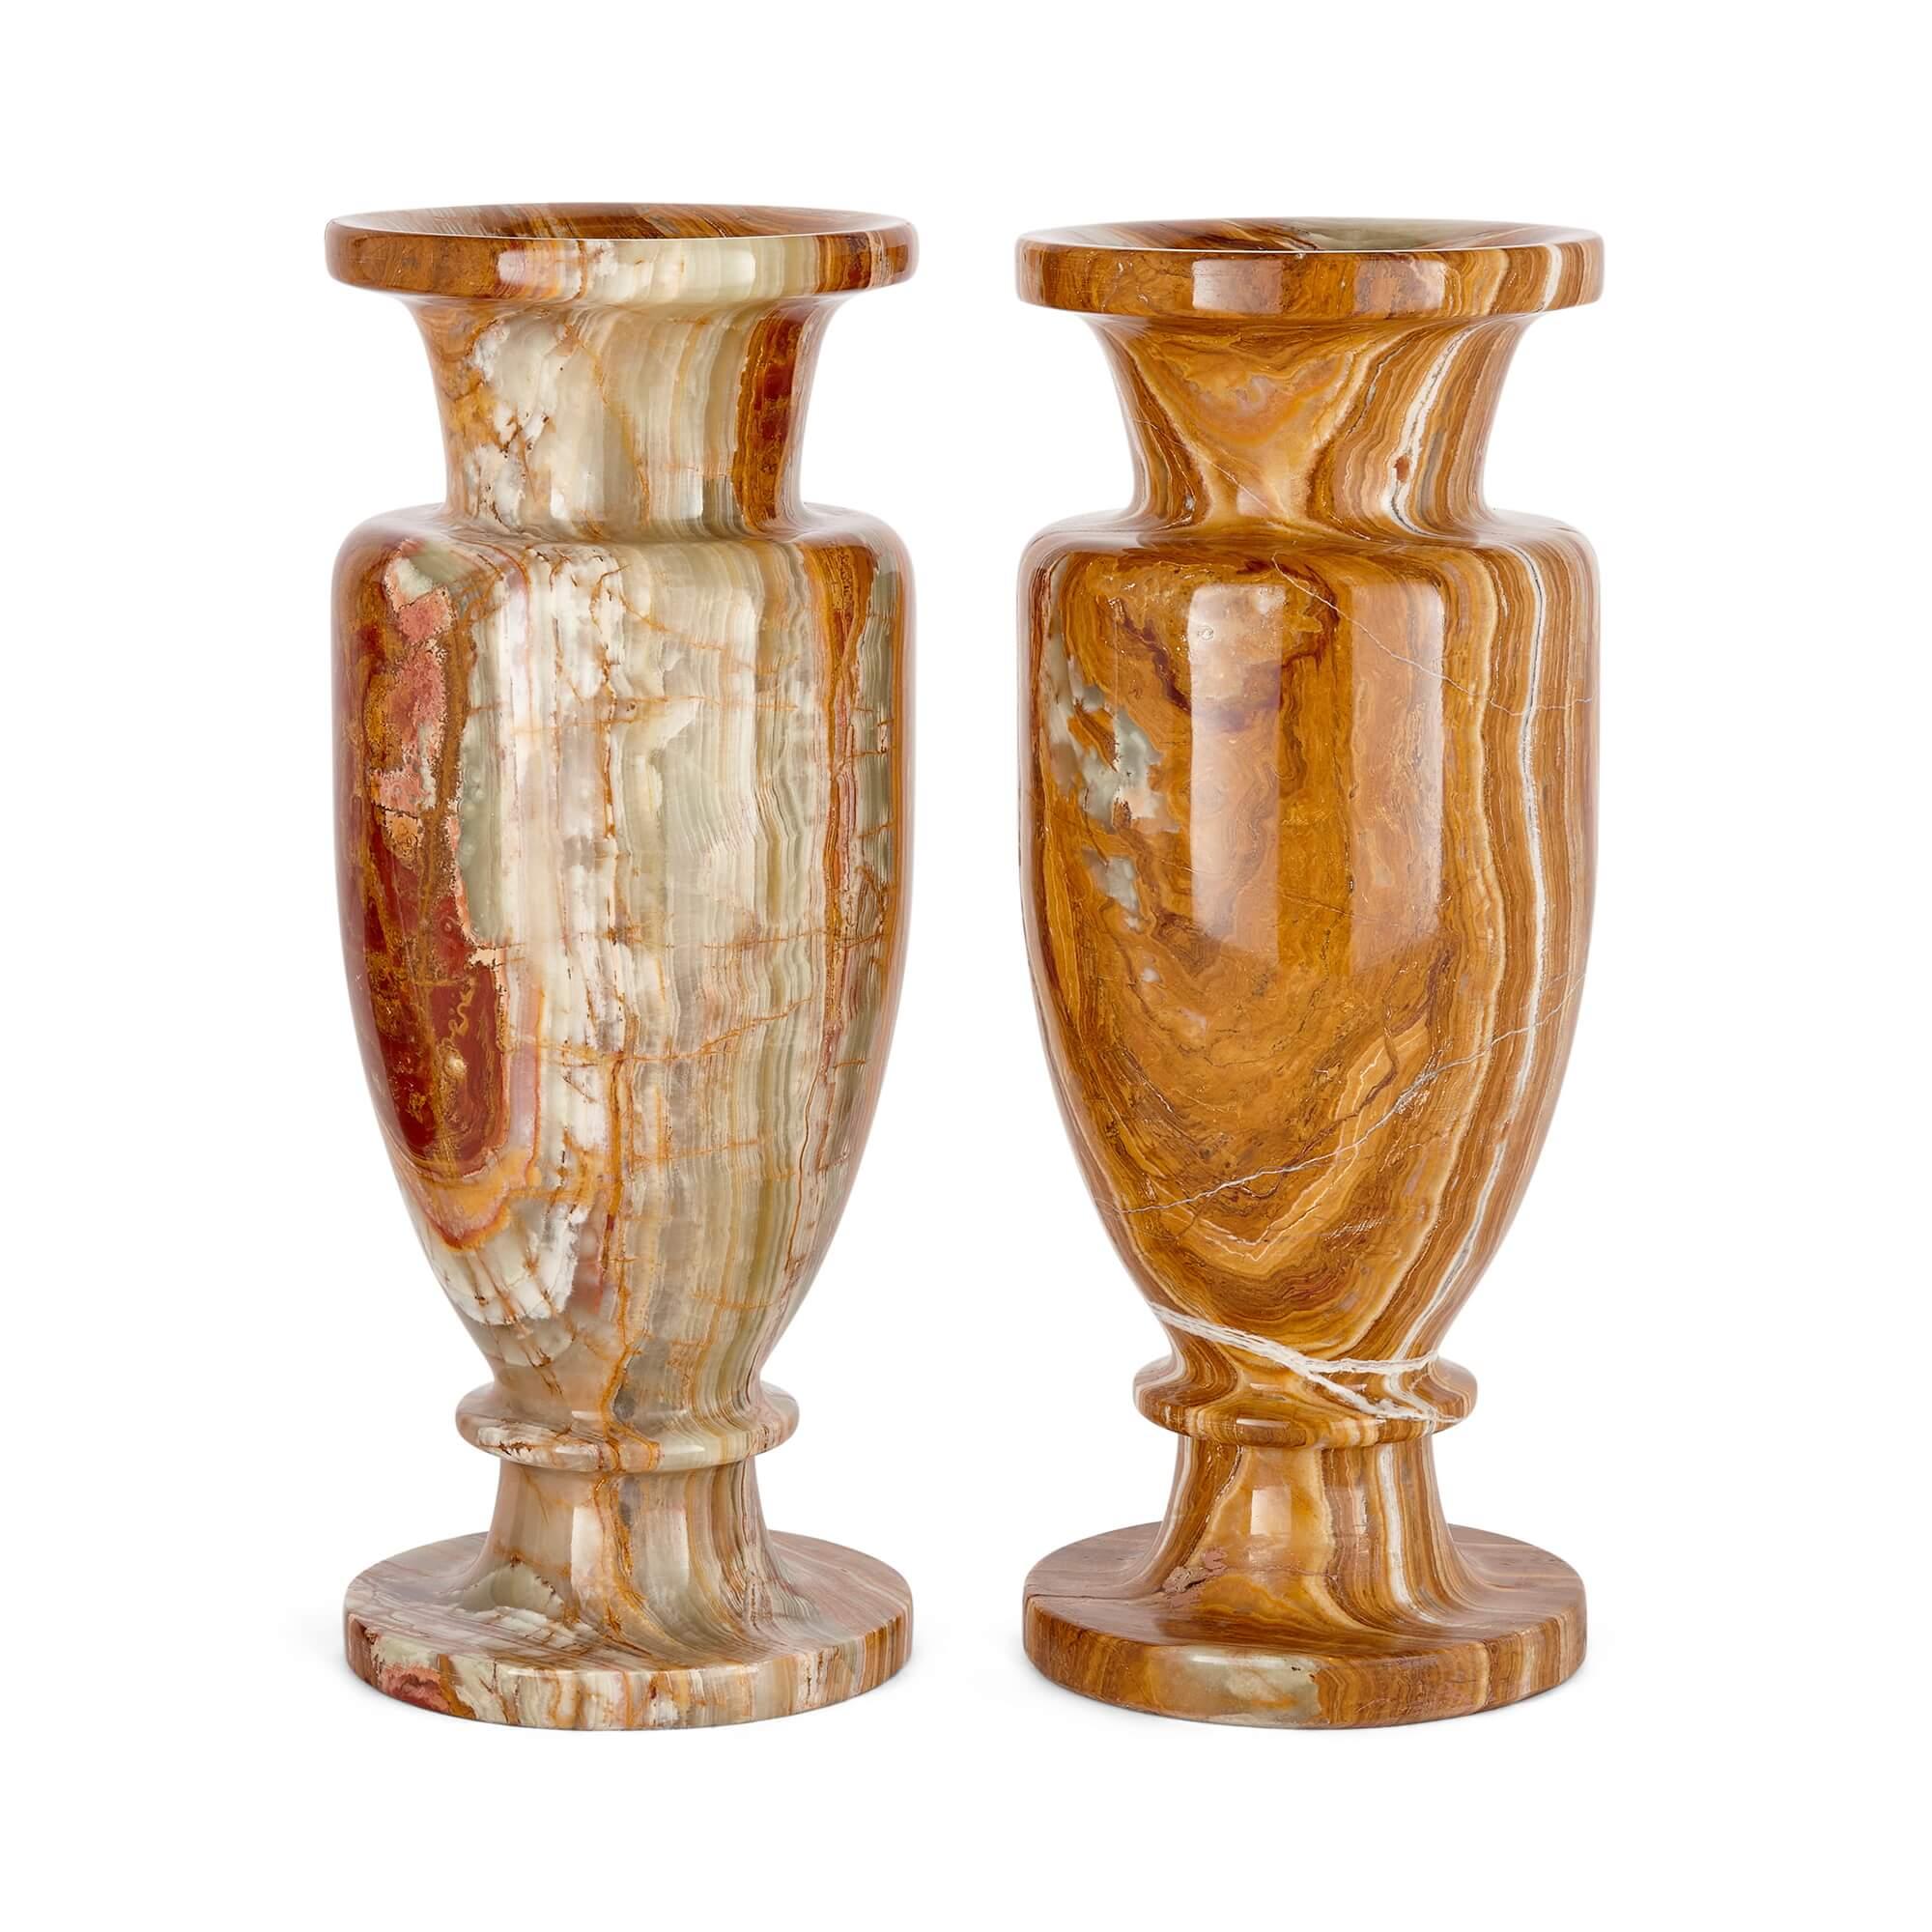 A pair of large decorative vases in red and green onyx
Continental, 20th Century
Height 38cm, diameter 15cm

Elegantly designed and and pristinely finished, these fine vases are carved from green and red onyx, with the natural bands, patterns,